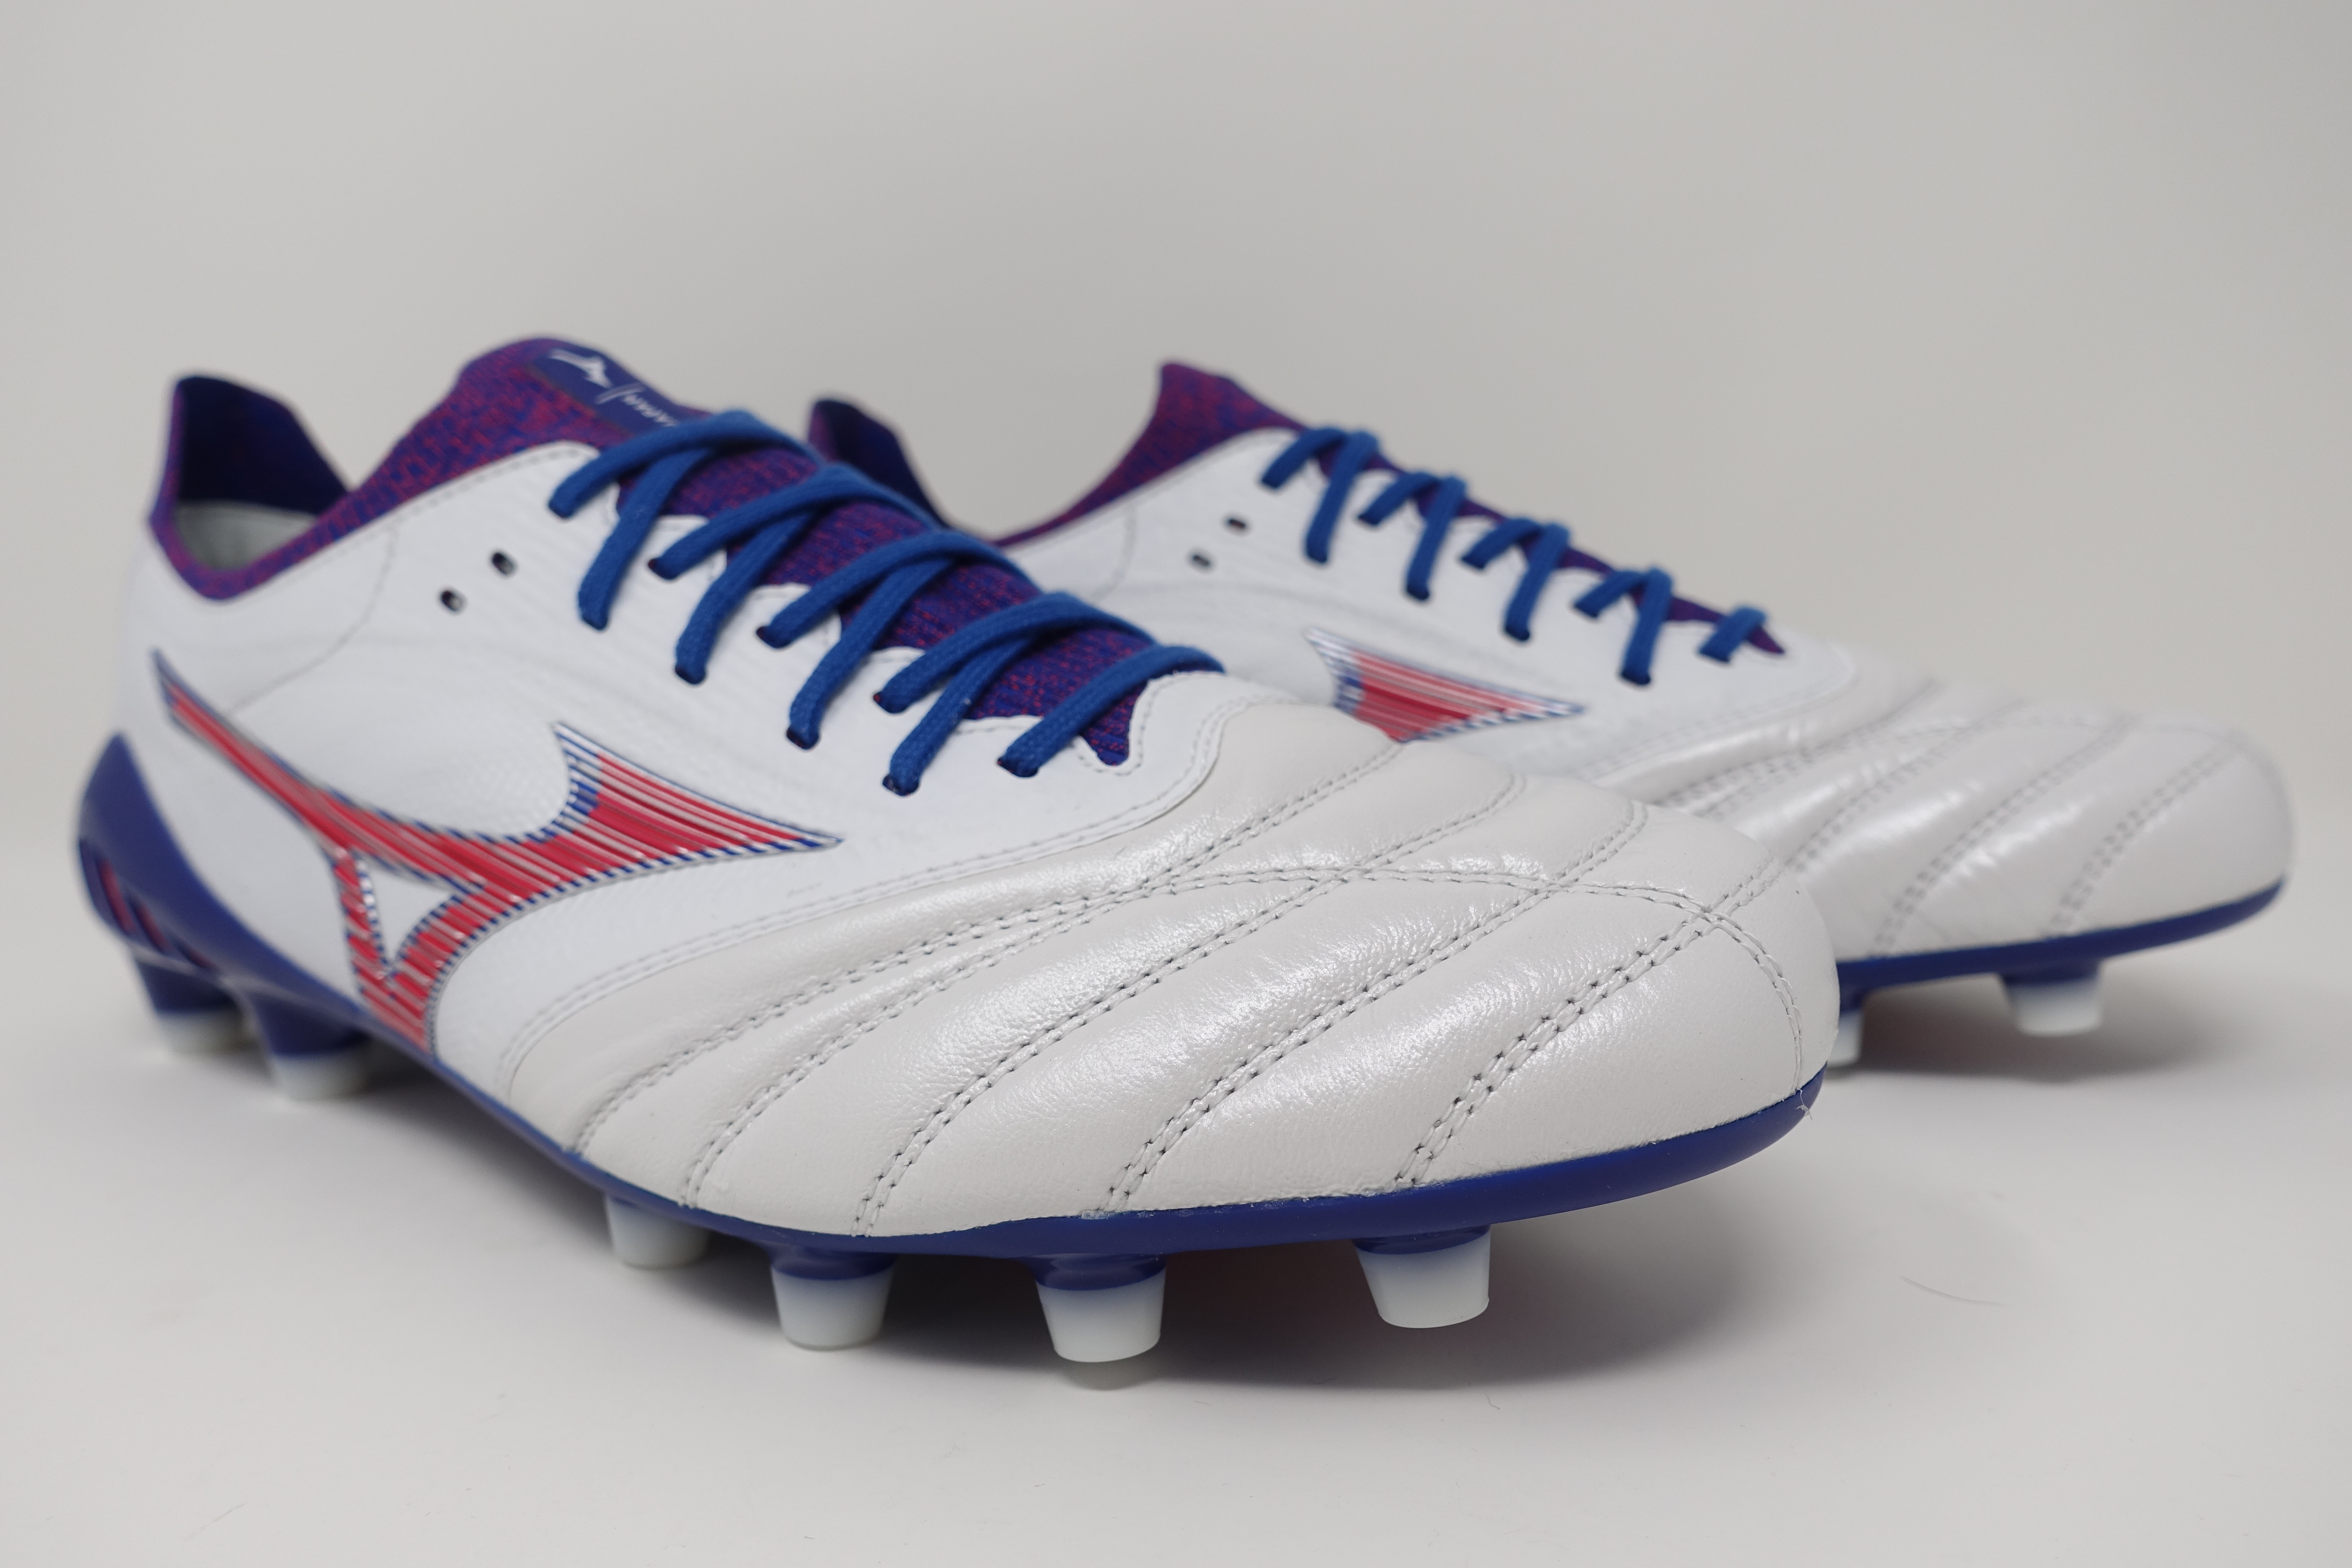 Mizuno-Morelia-Neo-3-Made-in-Japan-Next-Wave-Pack-Soccer-Football-Boots-2